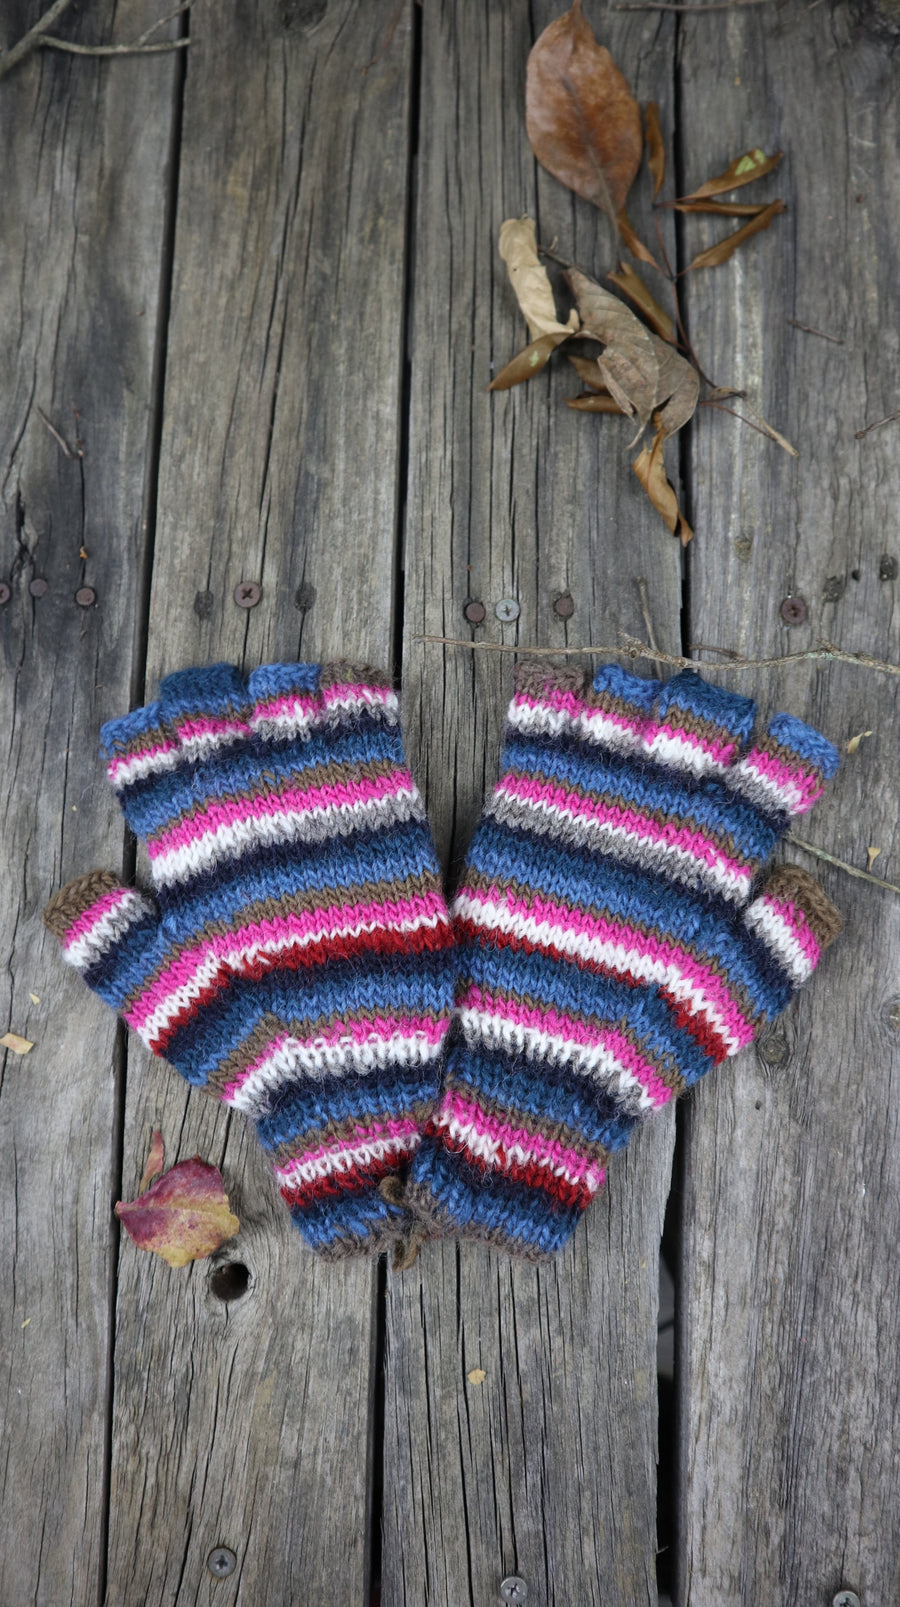 Fair Trade Ethical Children's Striped Fingerless Gloves with Cap in Pink, Brown and Black